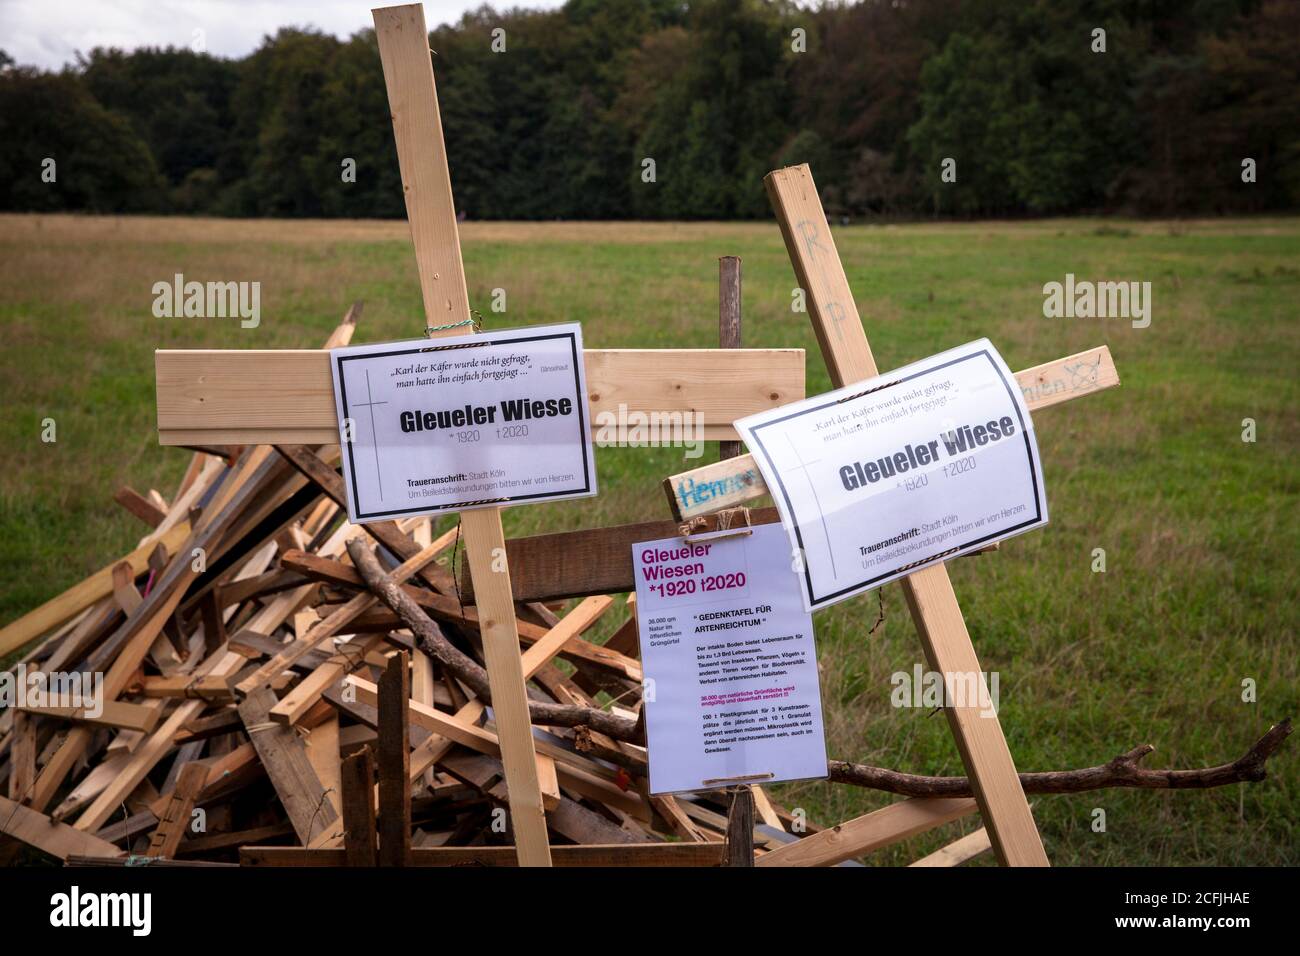 unknown persons had erected crosses on the Gleueler Wiese in the city forest in protest against the expansion of the training area of the football clu Stock Photo